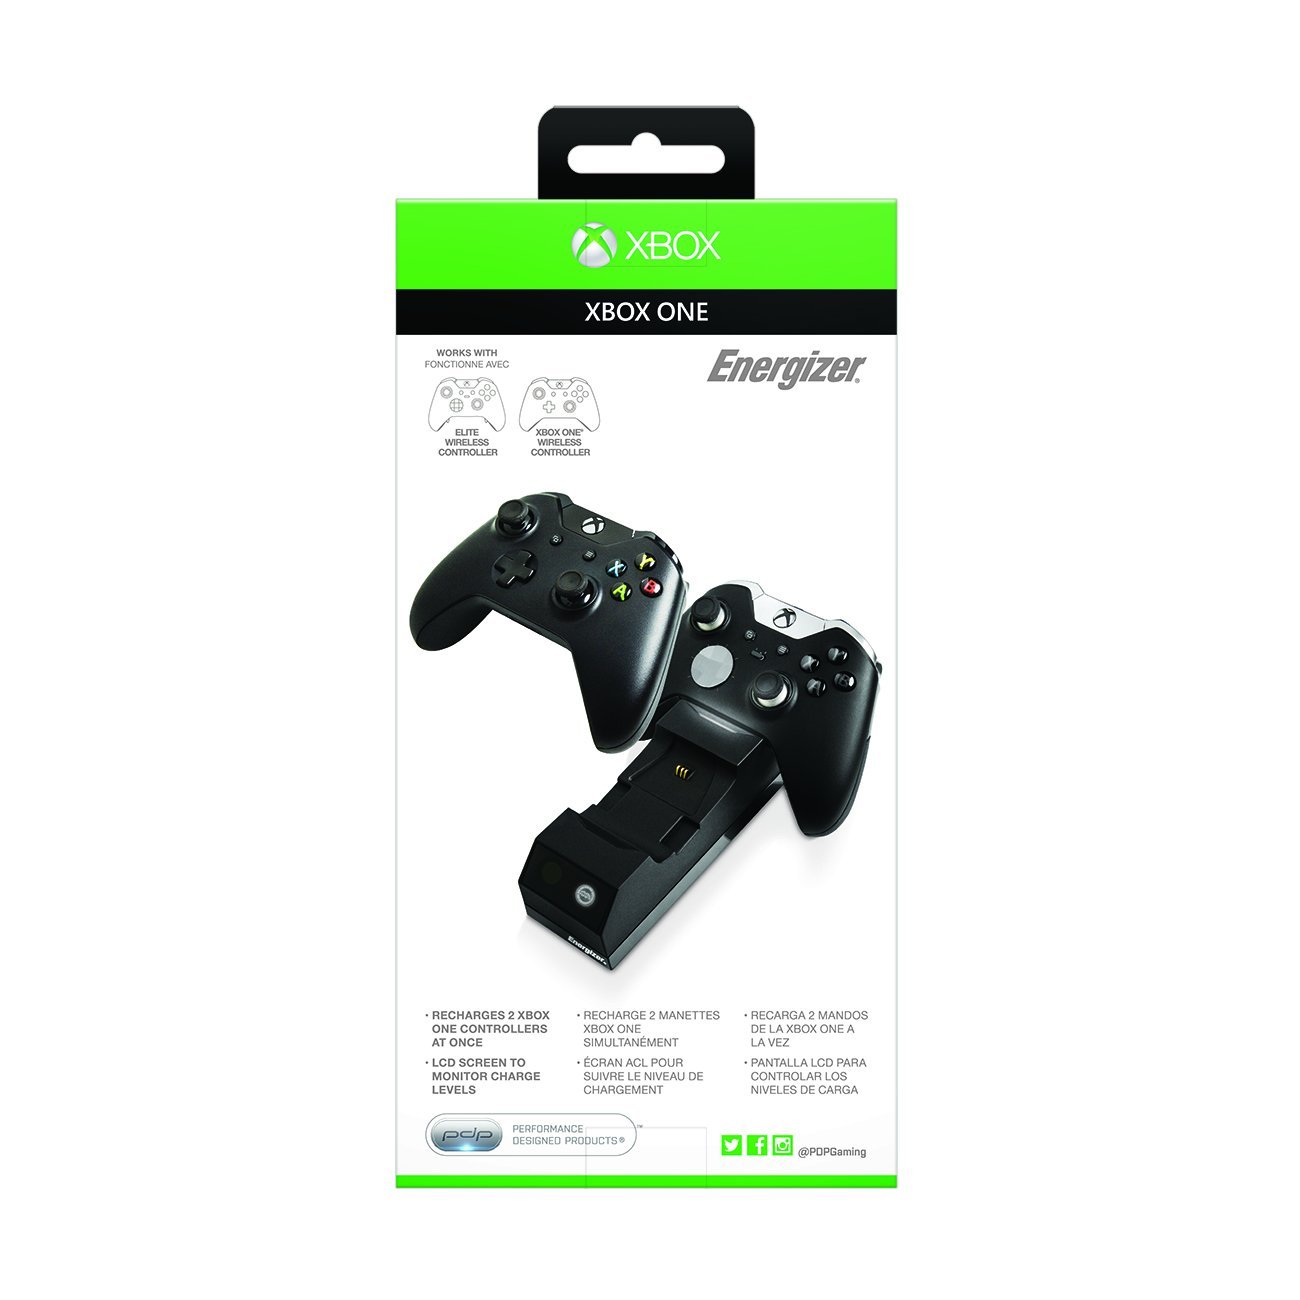 energizer xbox one charger manual